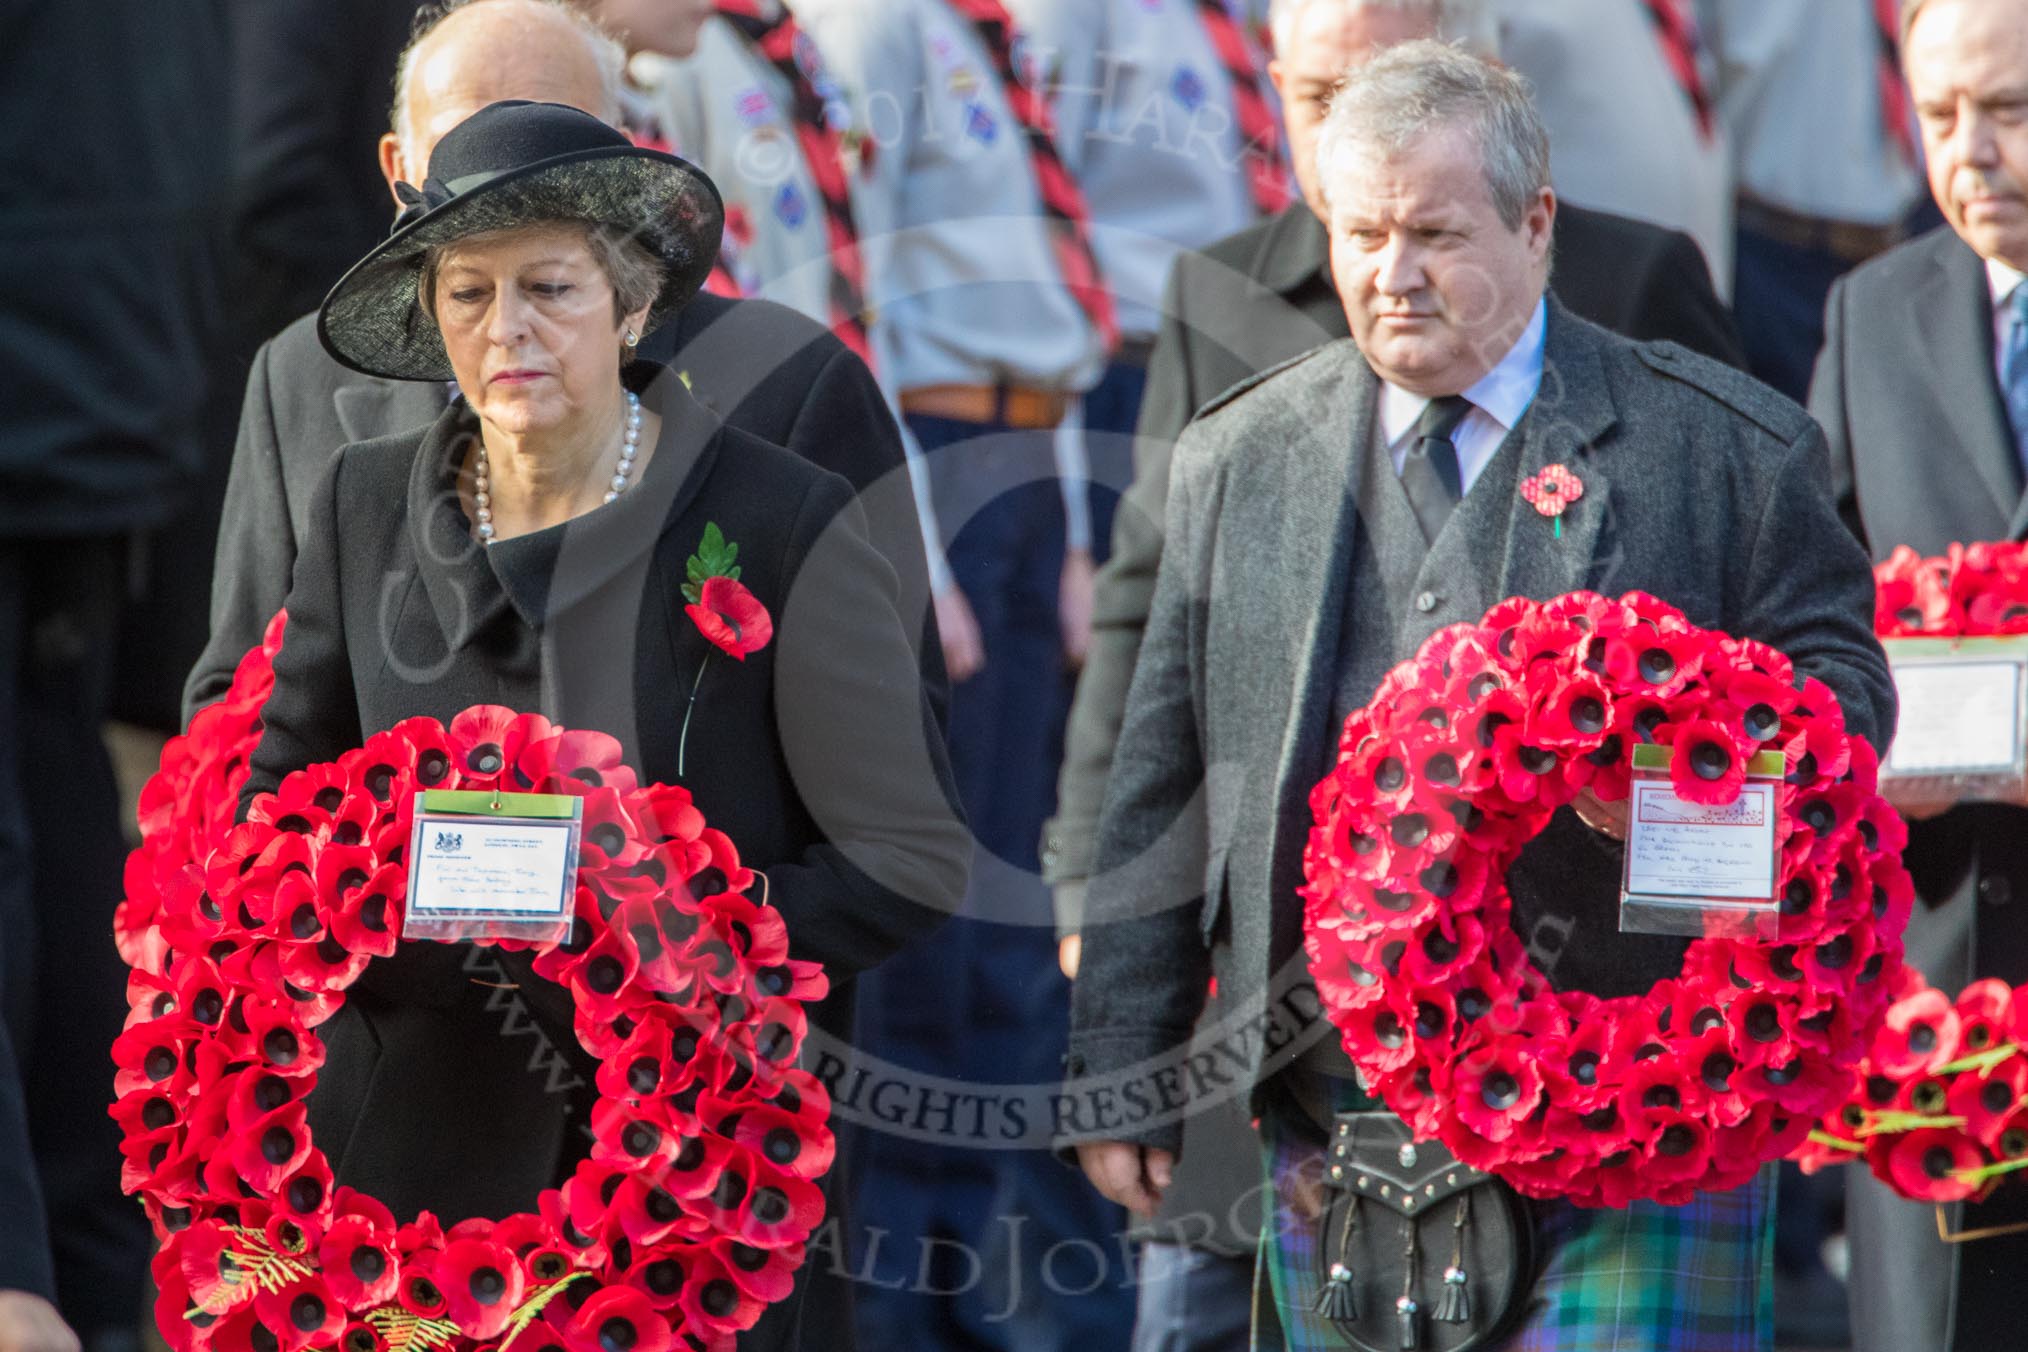 The Rt Hon Theresa May MP, Prime Minister, on behalf of the Government, and Mr Ian Blackford MP (the Westminster Scottish National Party Leader on the behalf of the SNP/the Plaid Cymru Parliamentary Group)  leaving the Foreign and Commonwealth Office with their wreaths during Remembrance Sunday Cenotaph Ceremony 2018 at Horse Guards Parade, Westminster, London, 11 November 2018, 10:55.